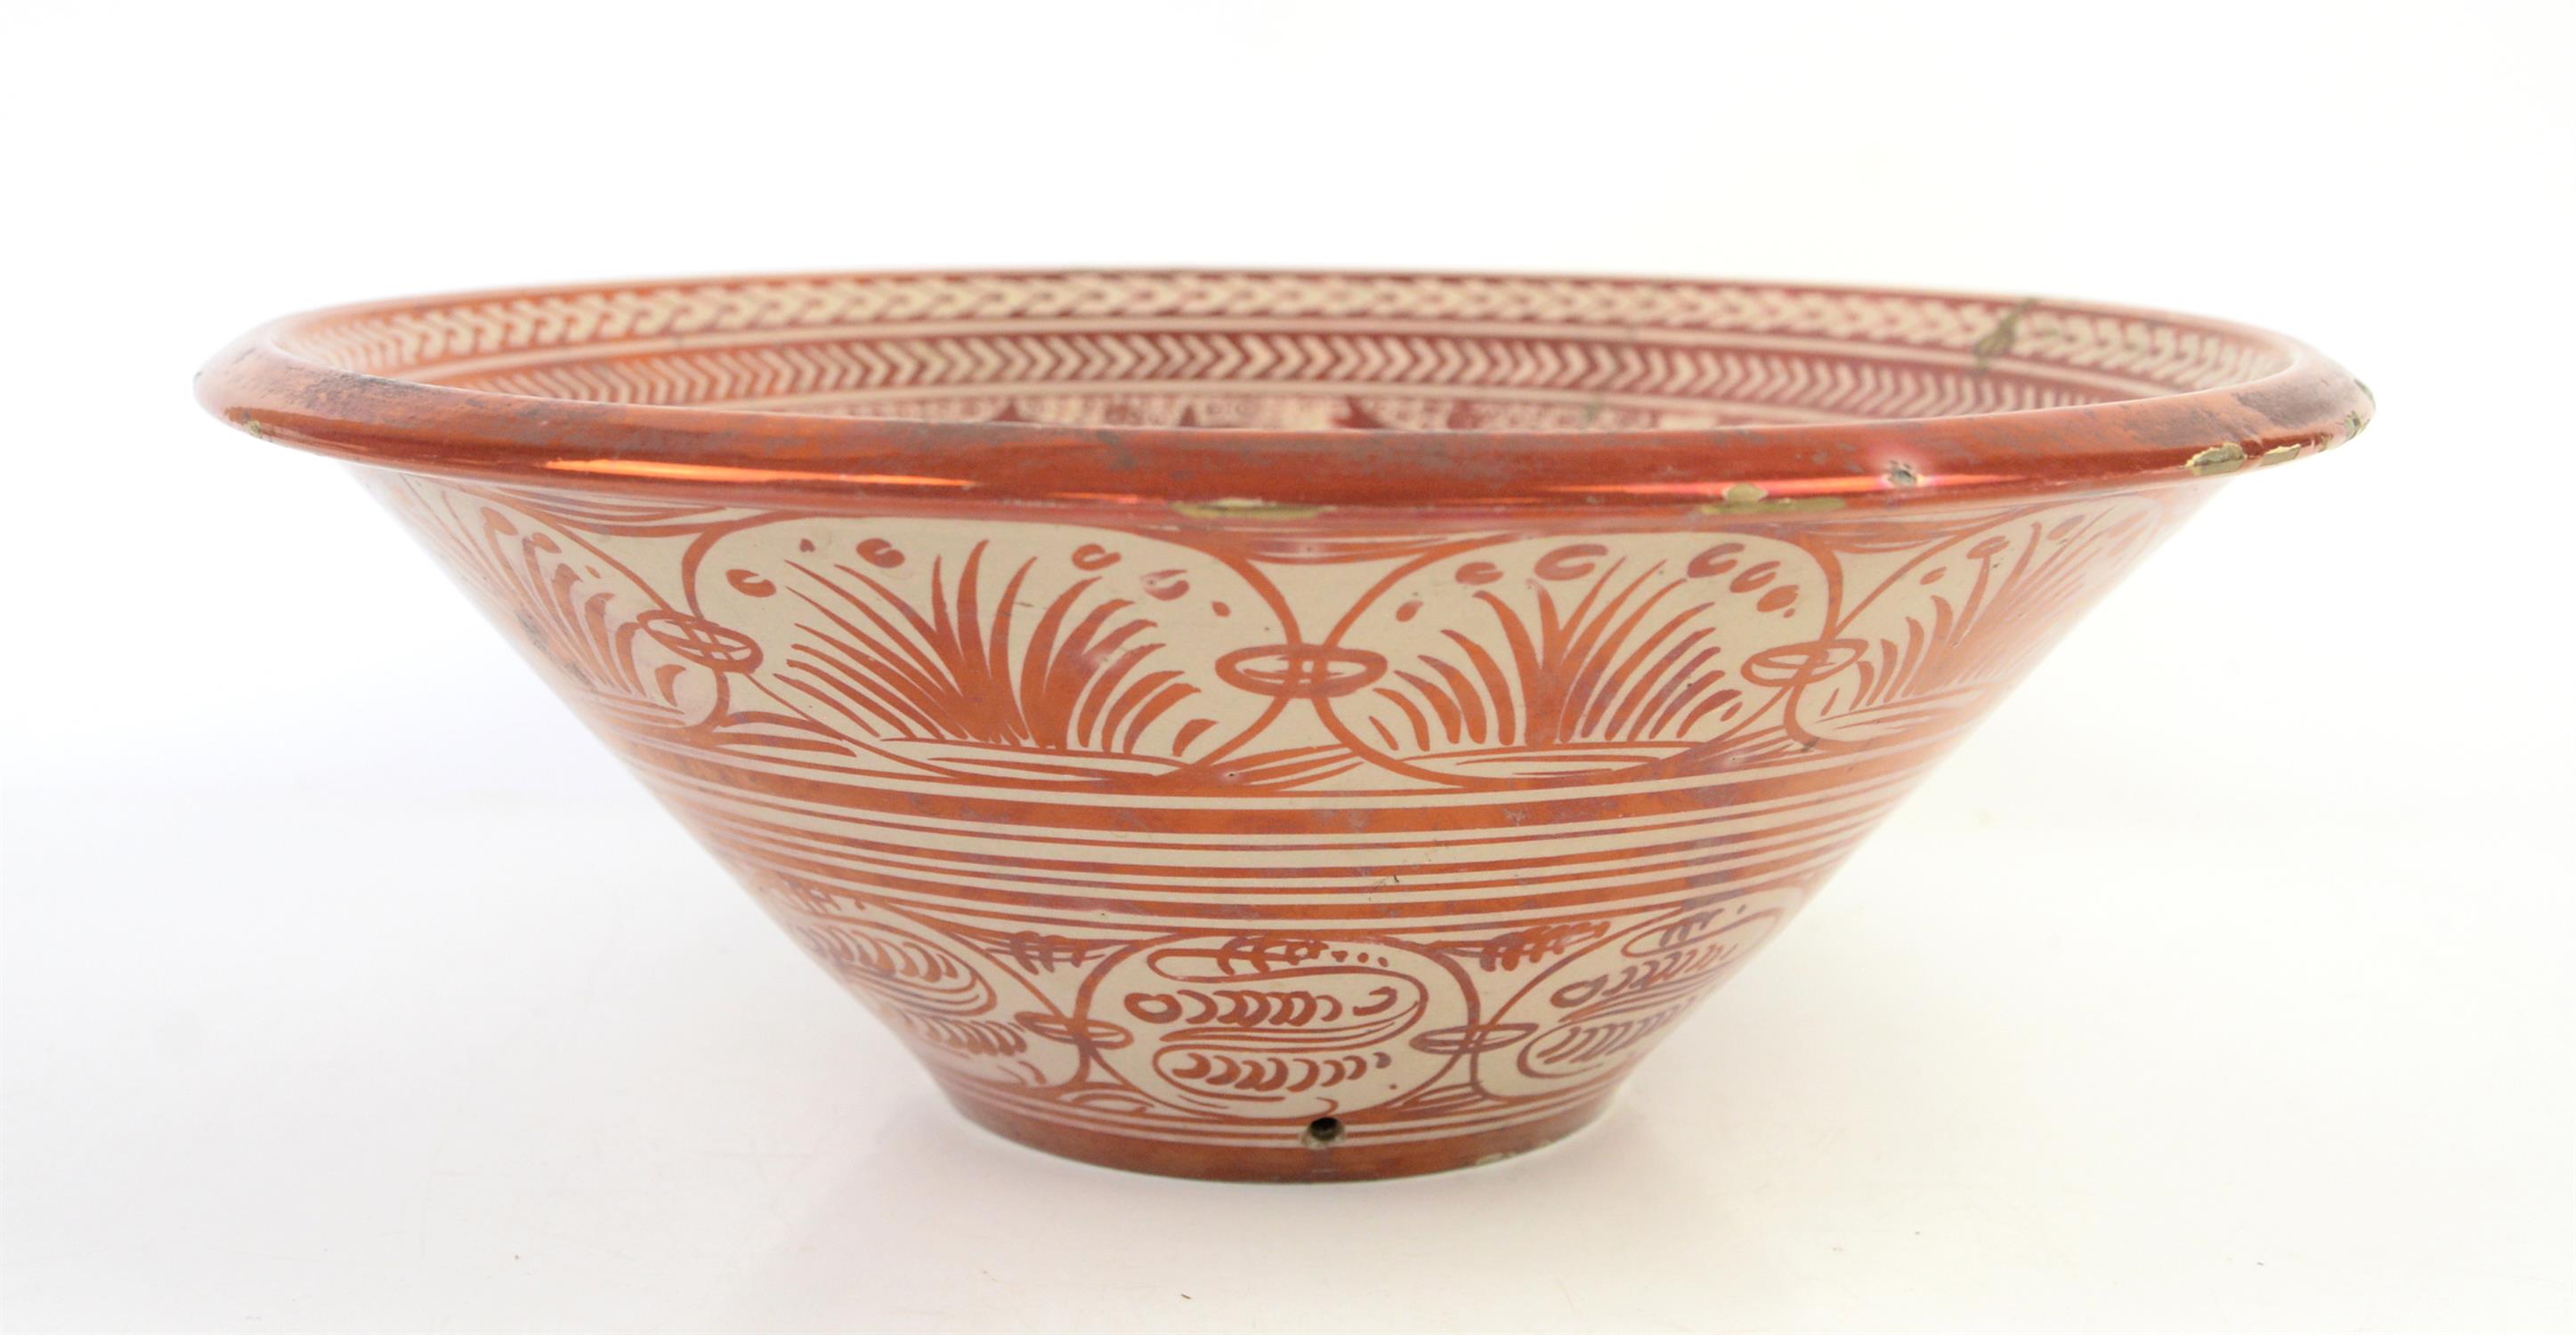 Large Cantagalli red copper lustre galleon and fish bowl, late 19th century, in the style of